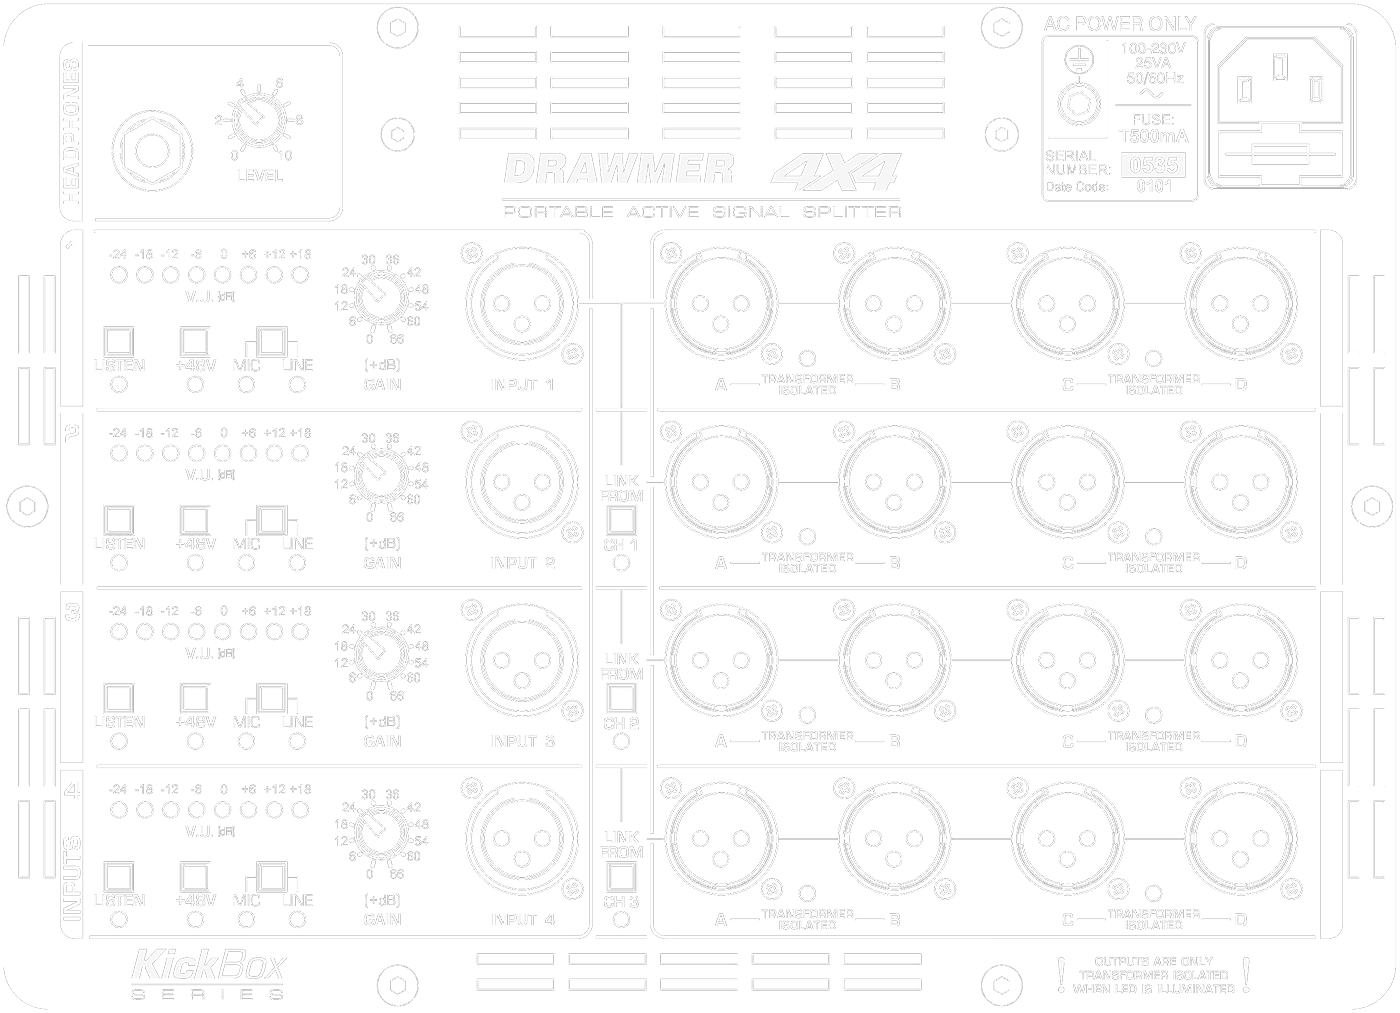 A line drawing of the front panel of the 4X4 showing controls and connectors